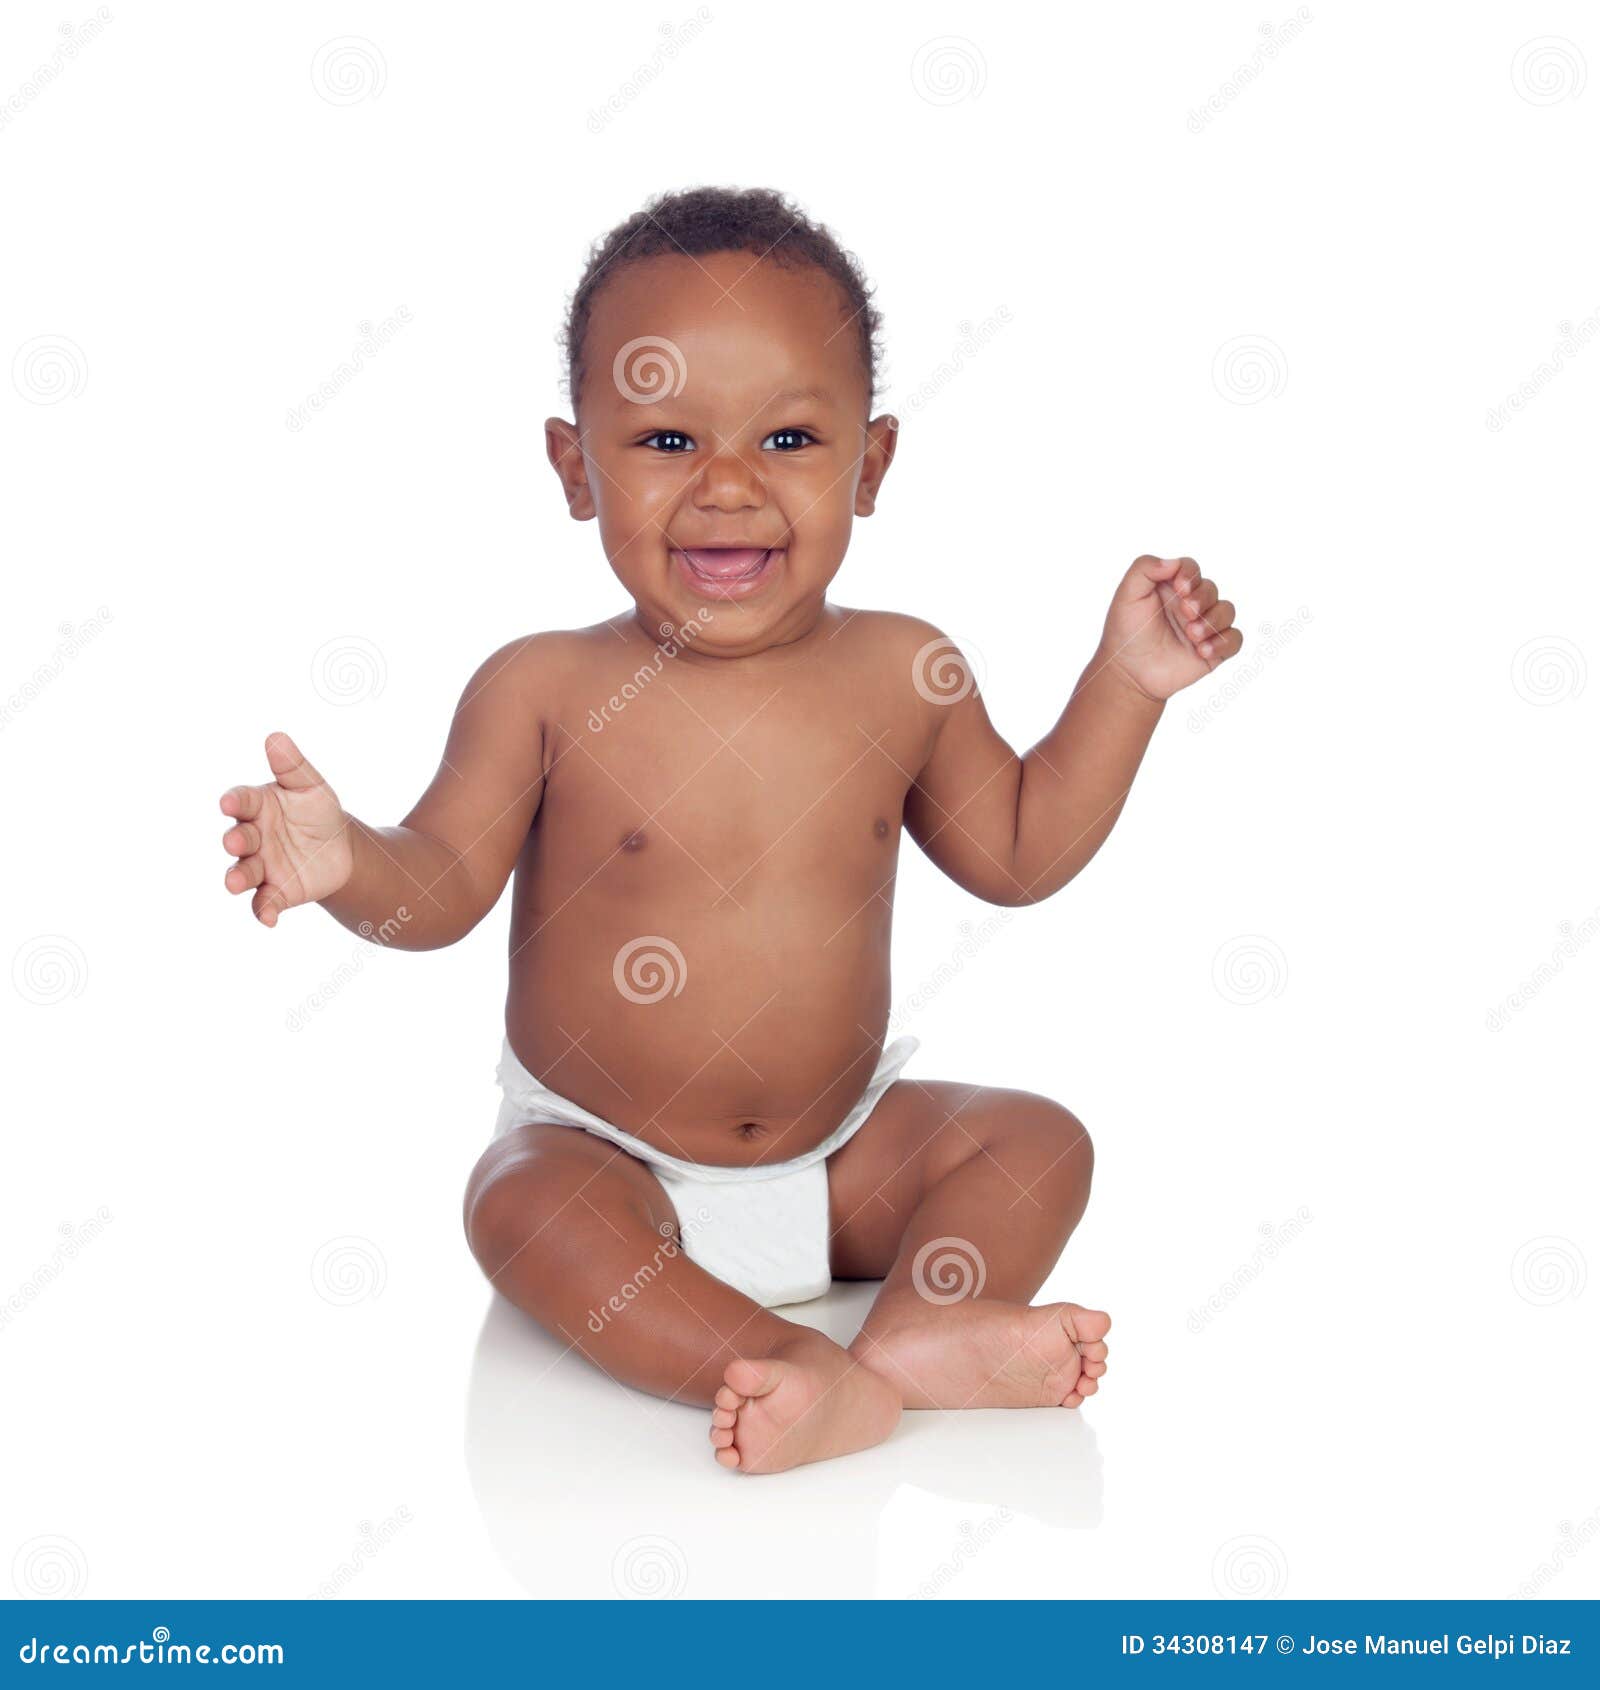 Adorable African Baby in Diaper Sitting on the Floor Stock Image